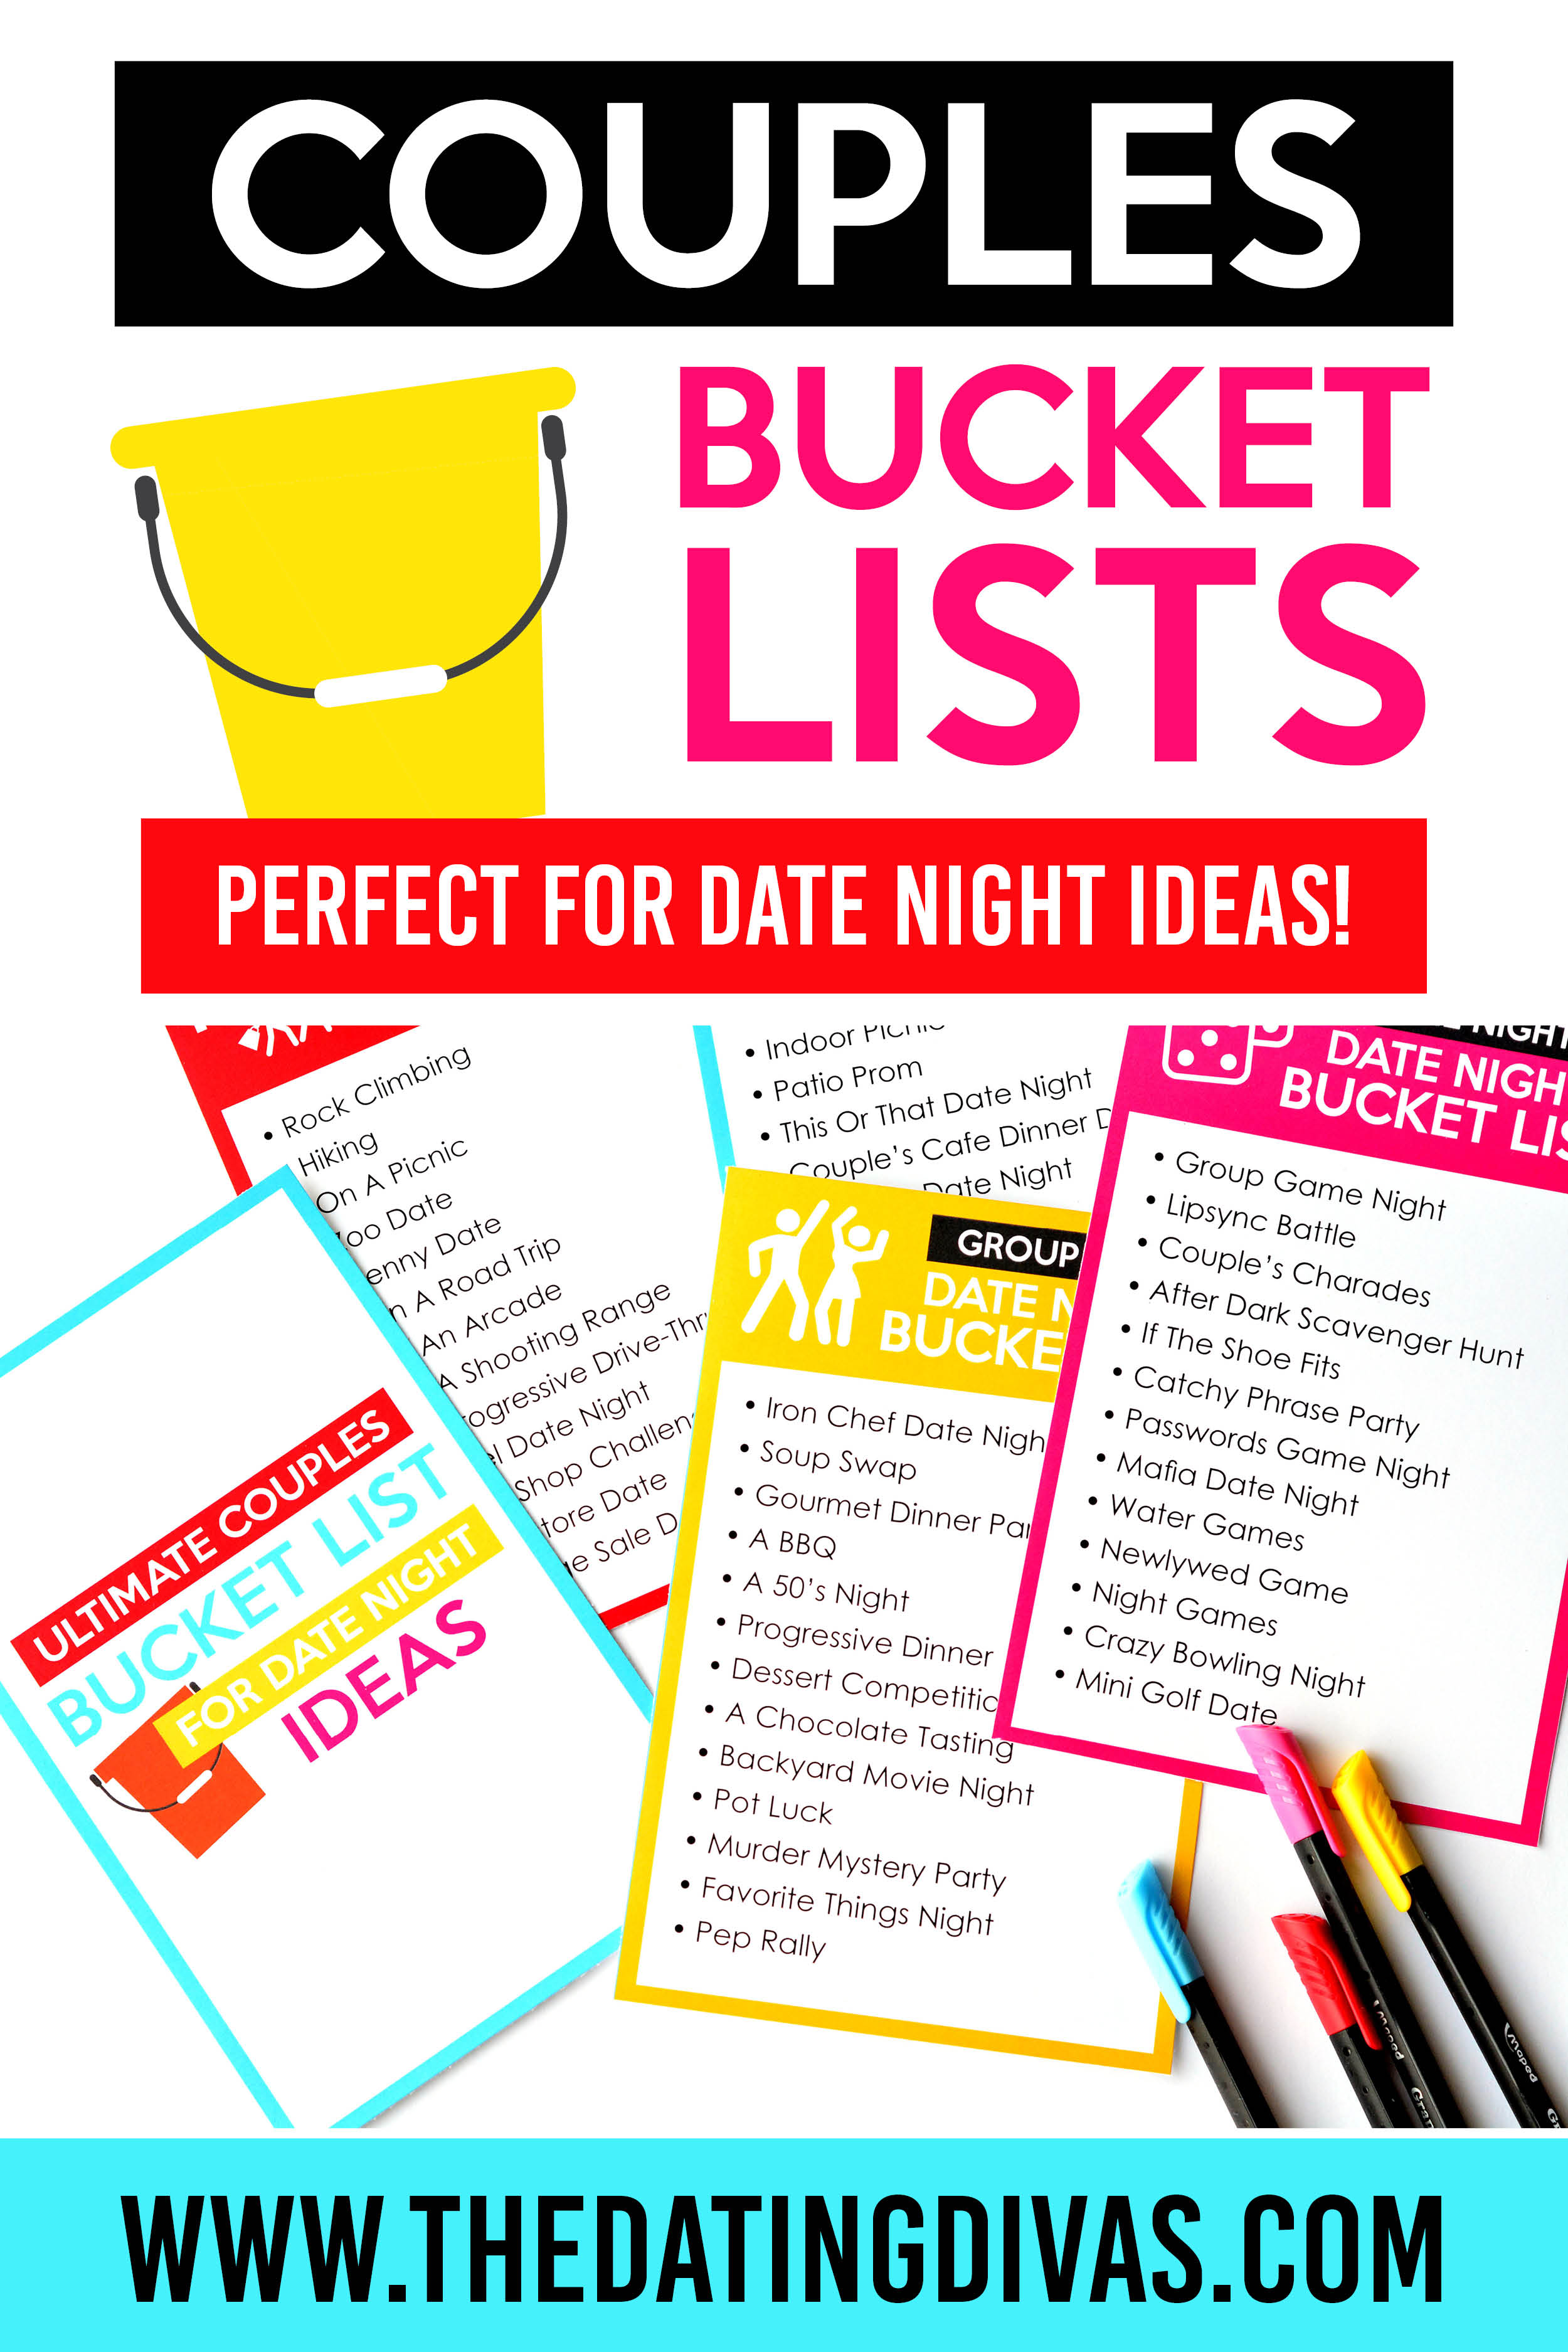 Couples Bucket Lists for Date Night